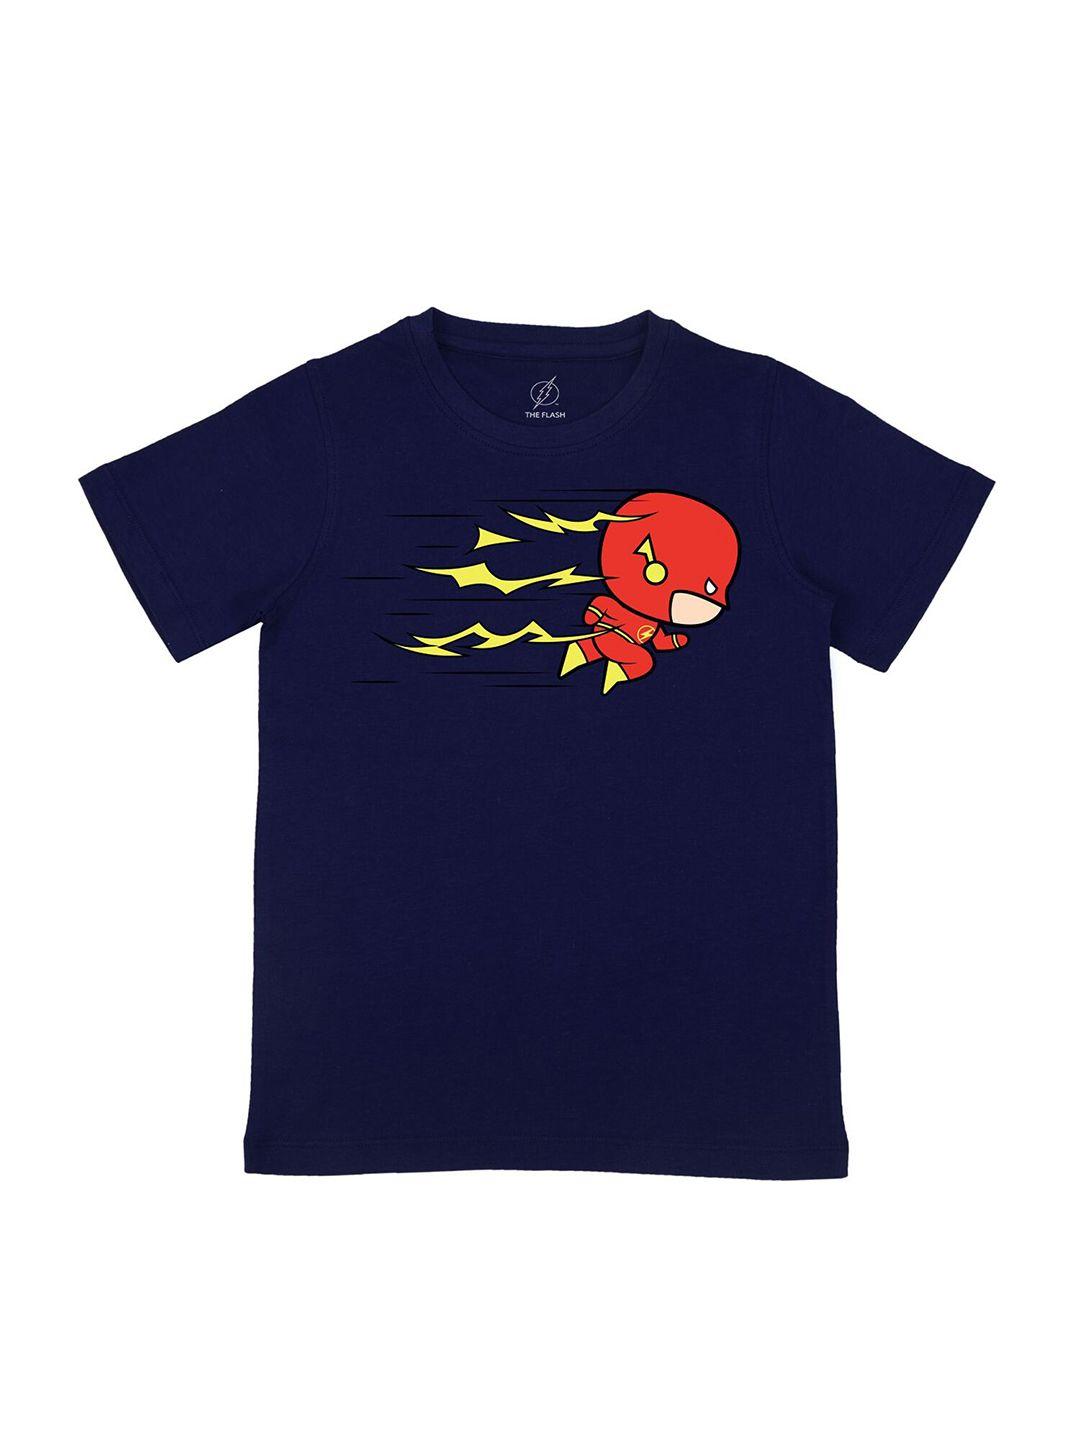 dc by wear your mind boys navy blue flash printed t-shirt